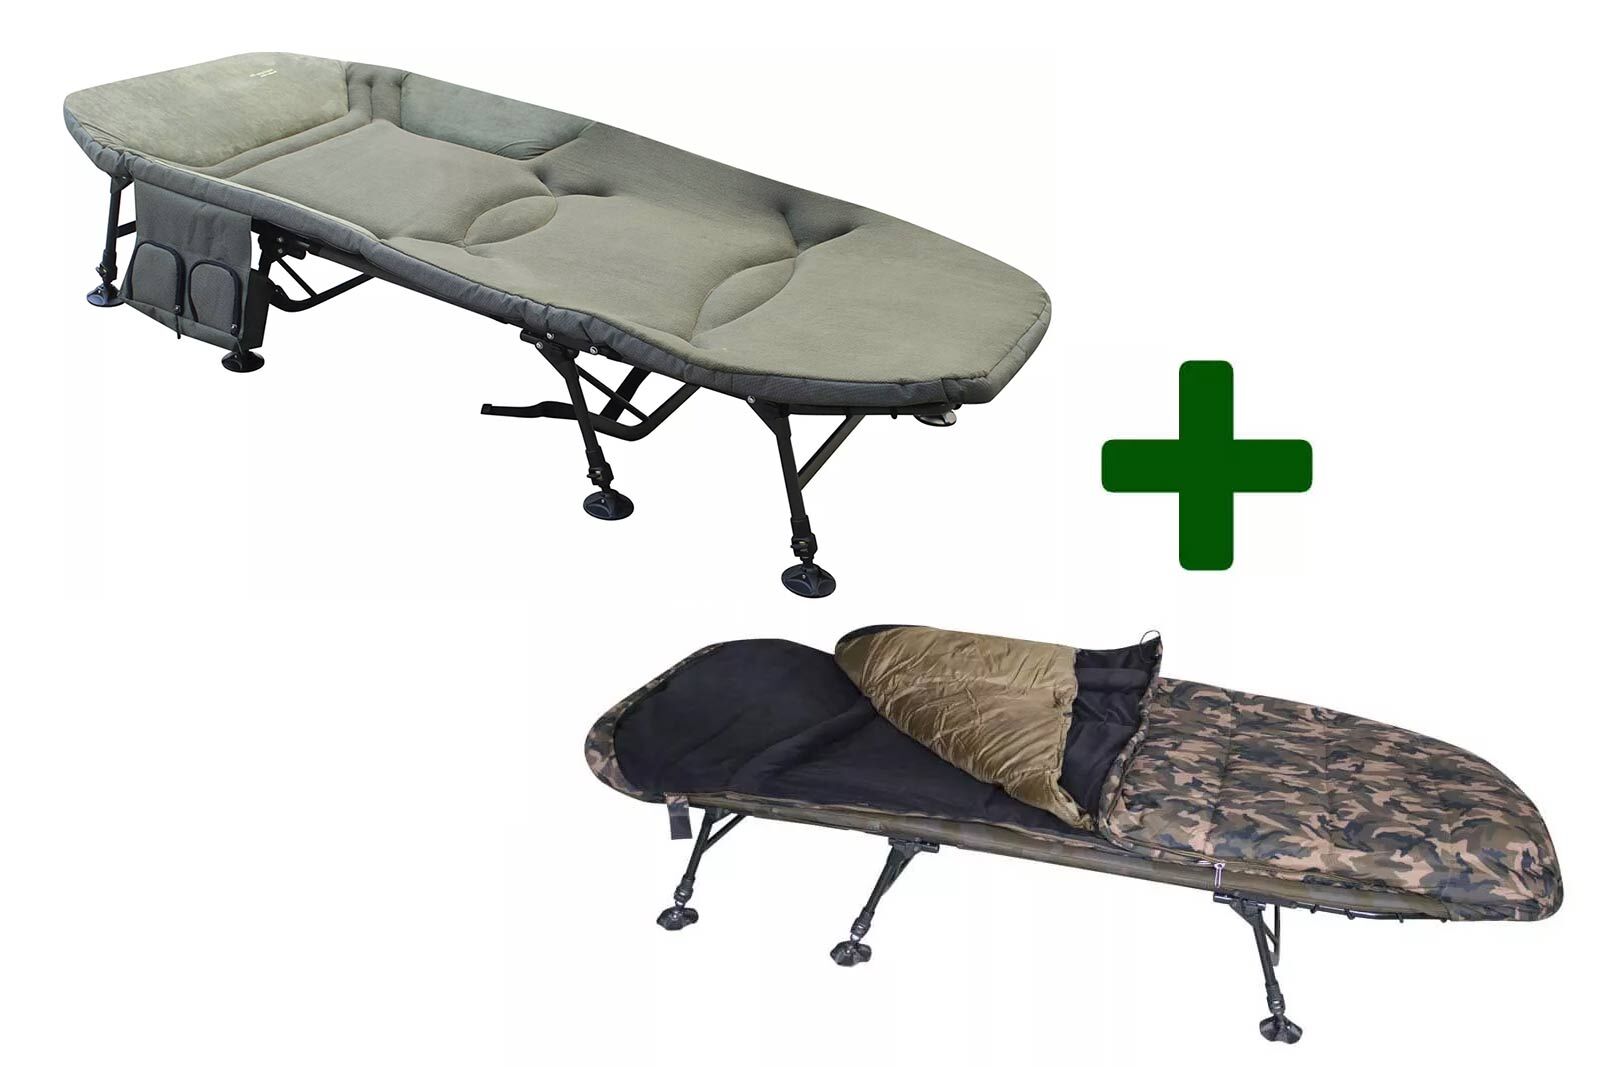 Giant Bedchair plus Fort Knox 2in1 Schlafsack